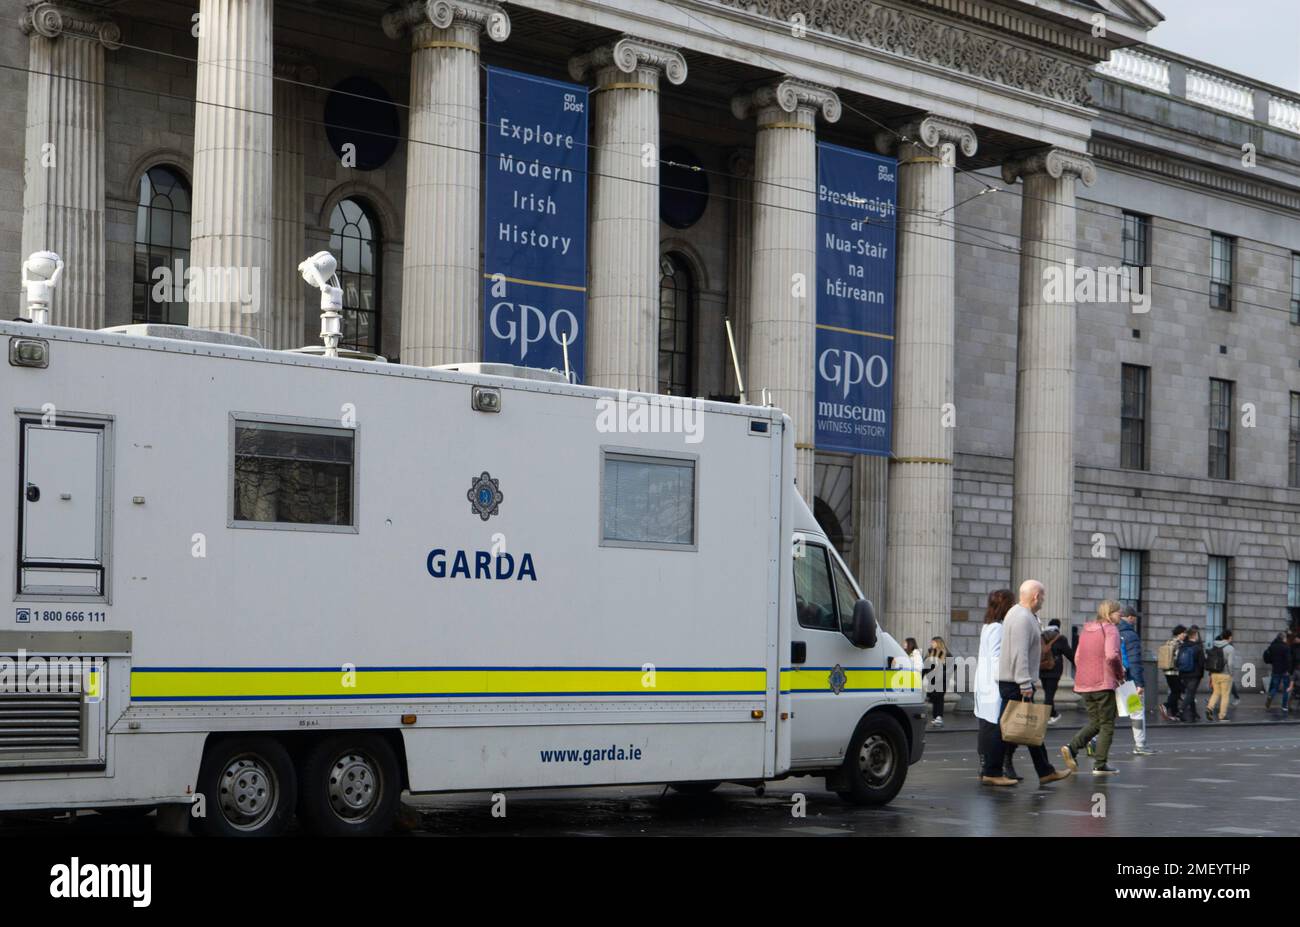 The mobile Garda Van in O’Connell Street, Dublin, Ireland. A semi permanent presence as they await the opening of a new station. Stock Photo